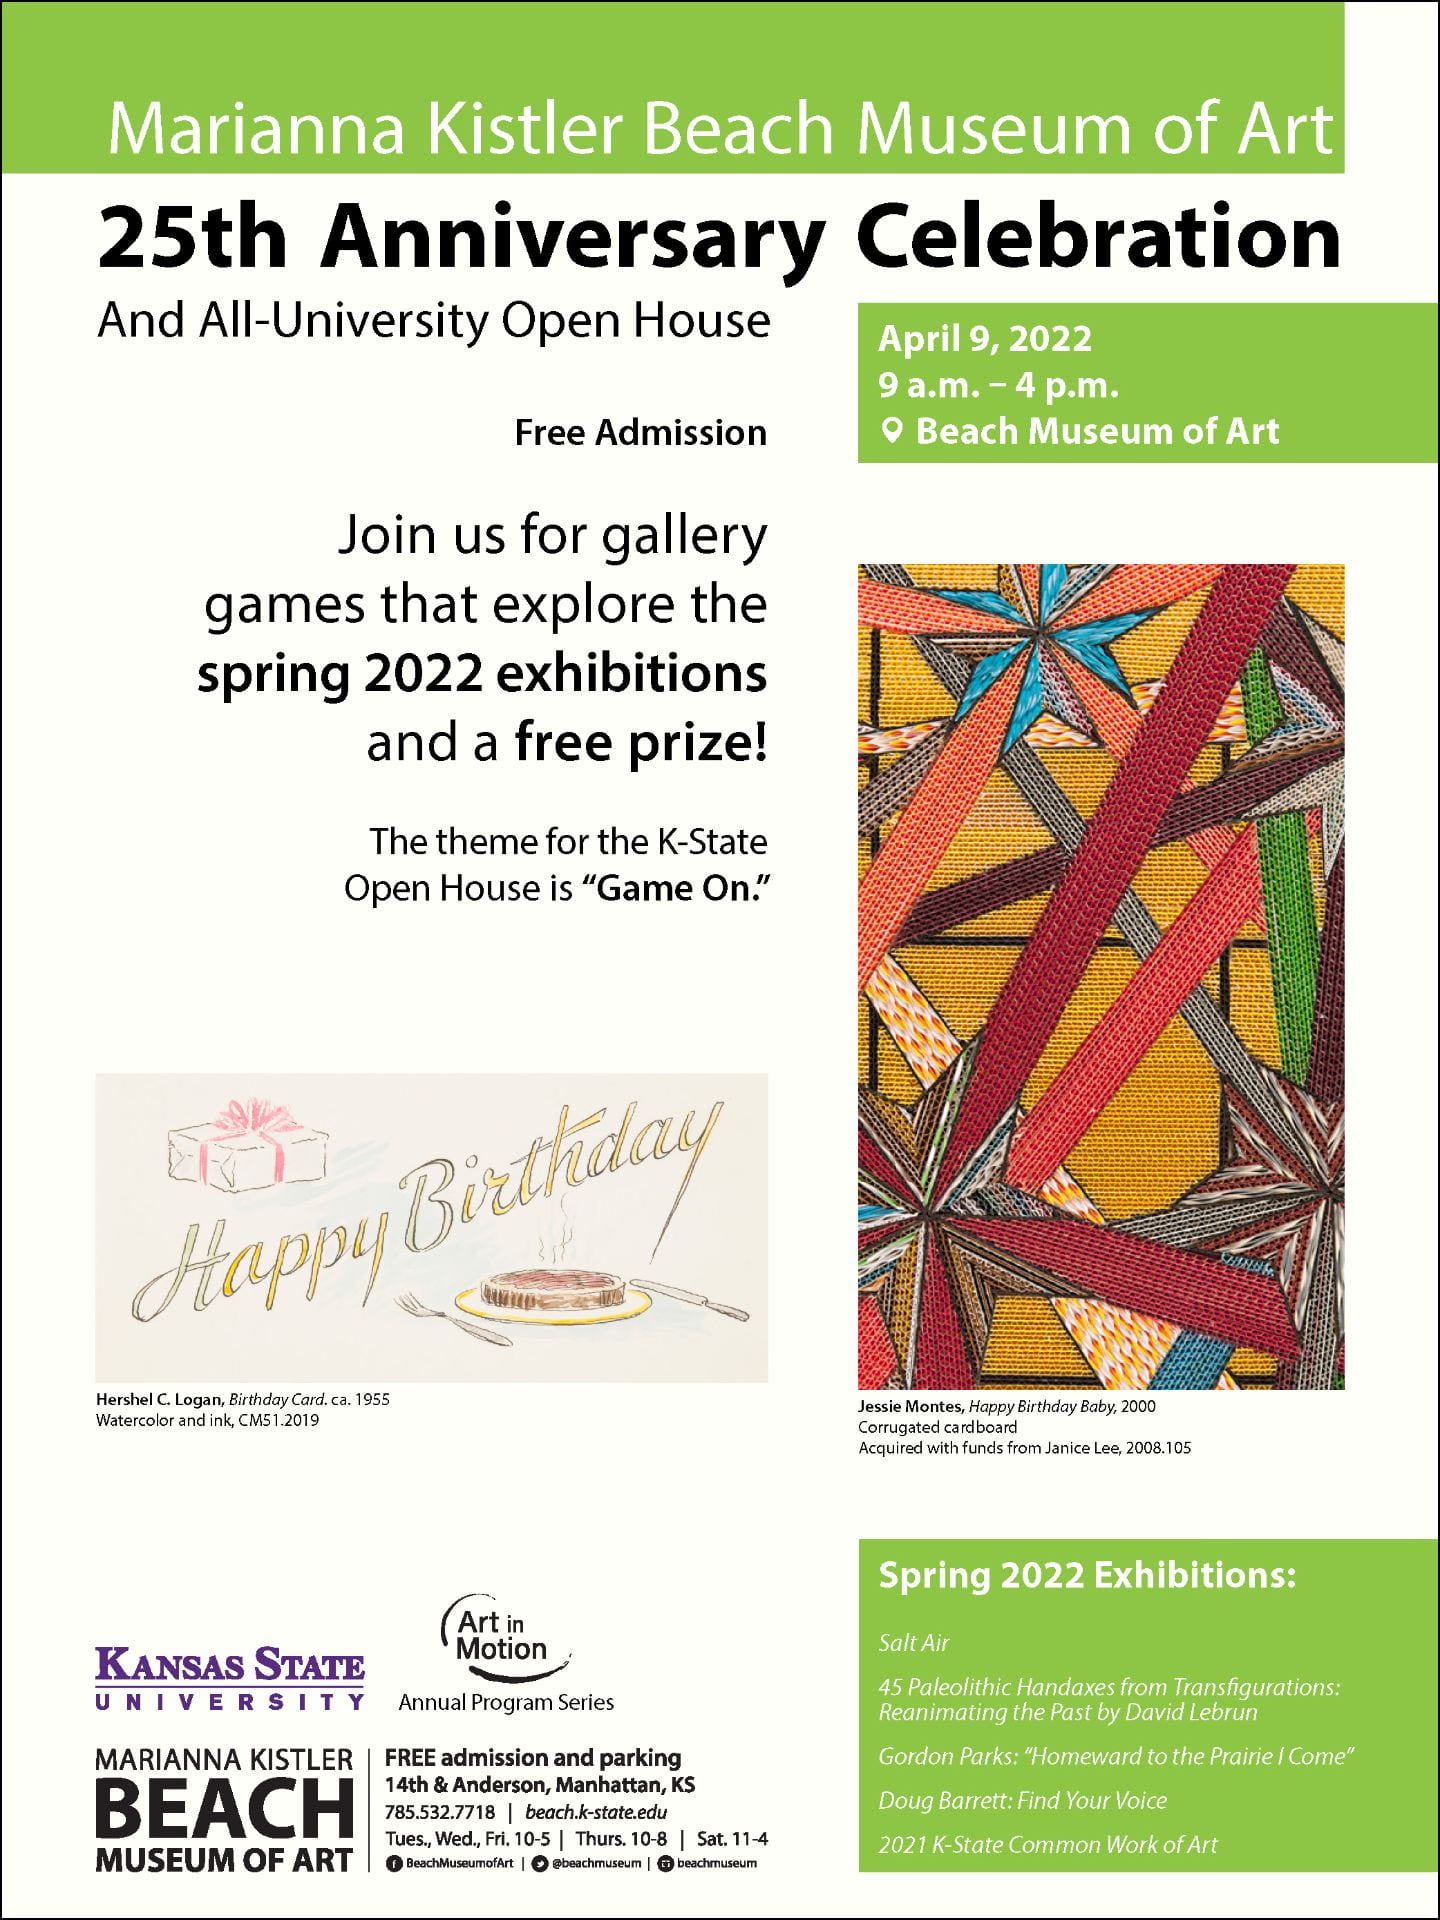 Flyer promoting celebration at the museum